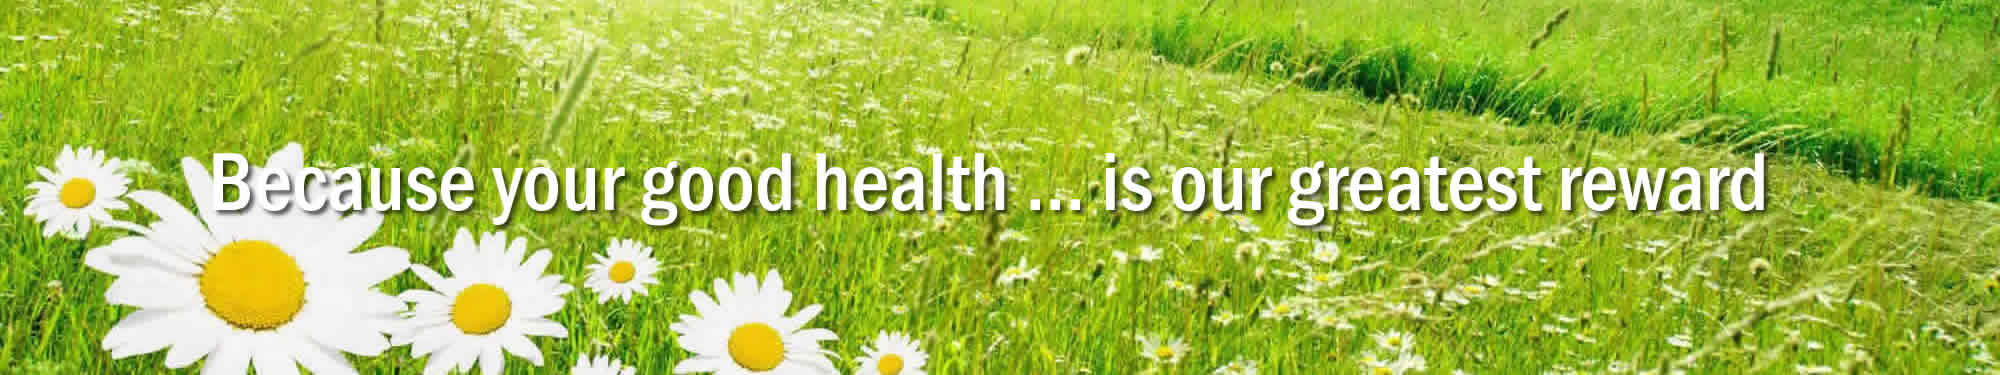 Because your good health ... is our greatest reward